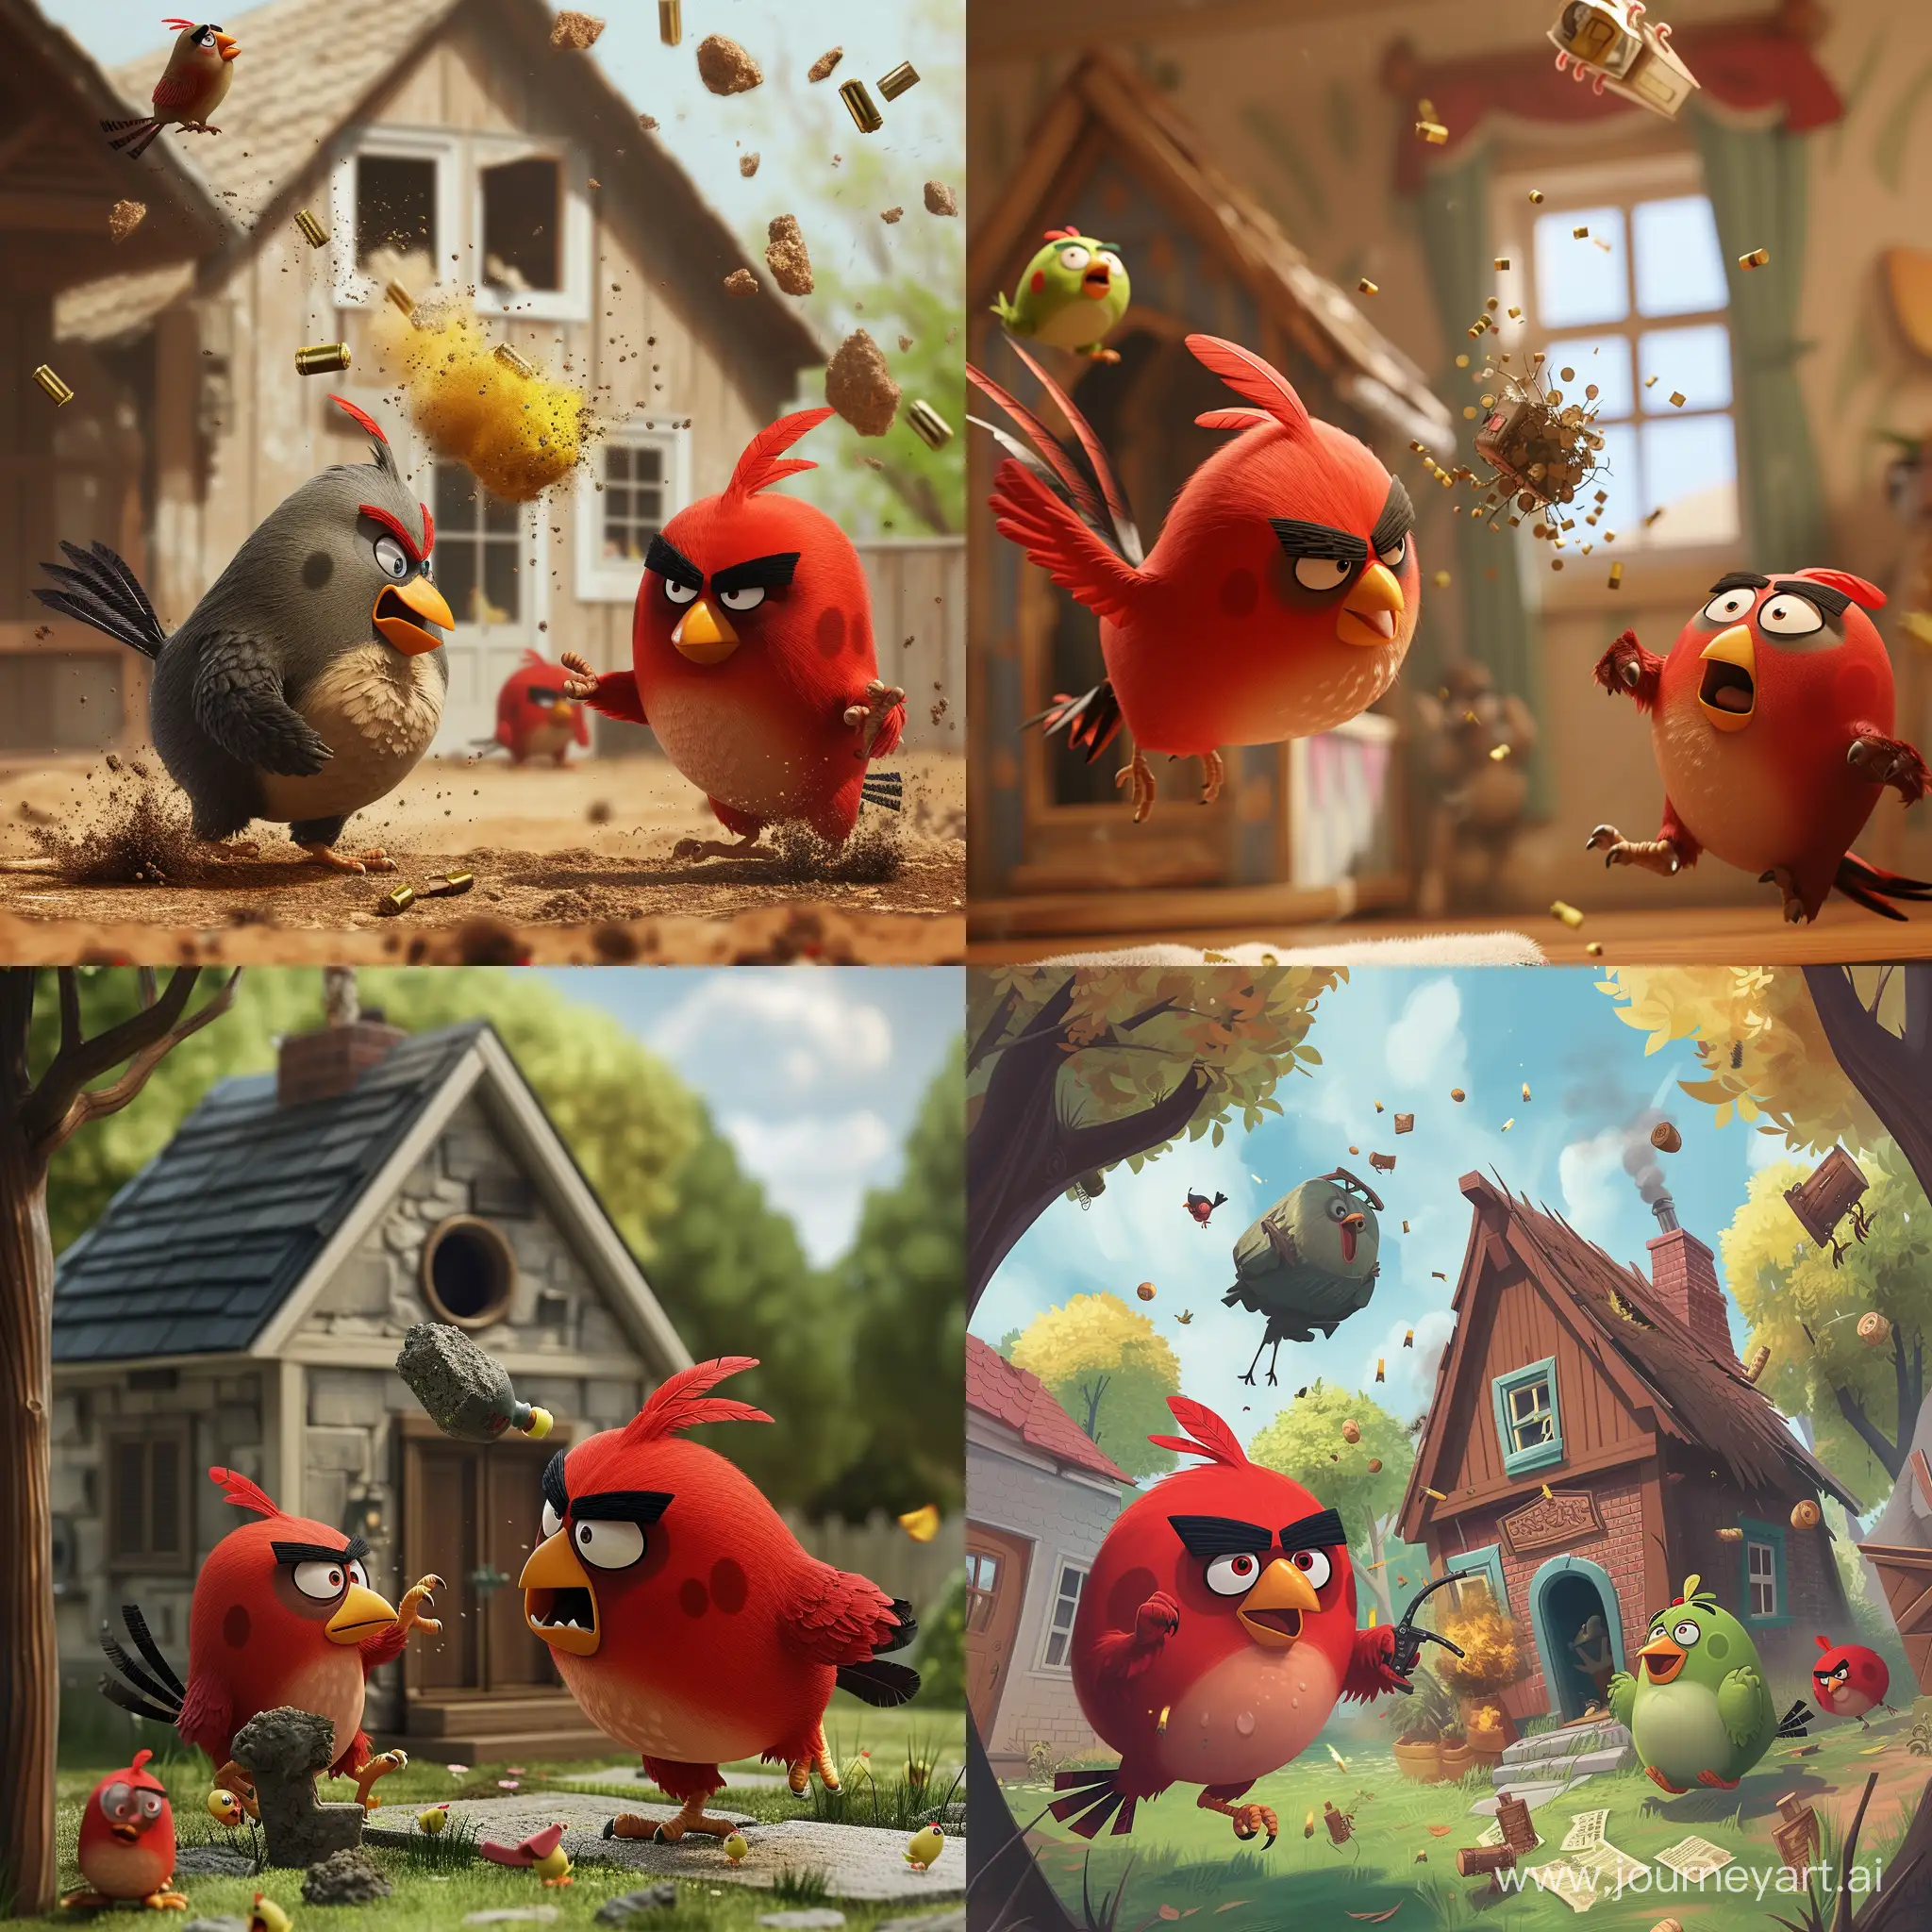 Angry-Birds-Attack-Explosive-Chaos-in-Donald-Trumps-Residence